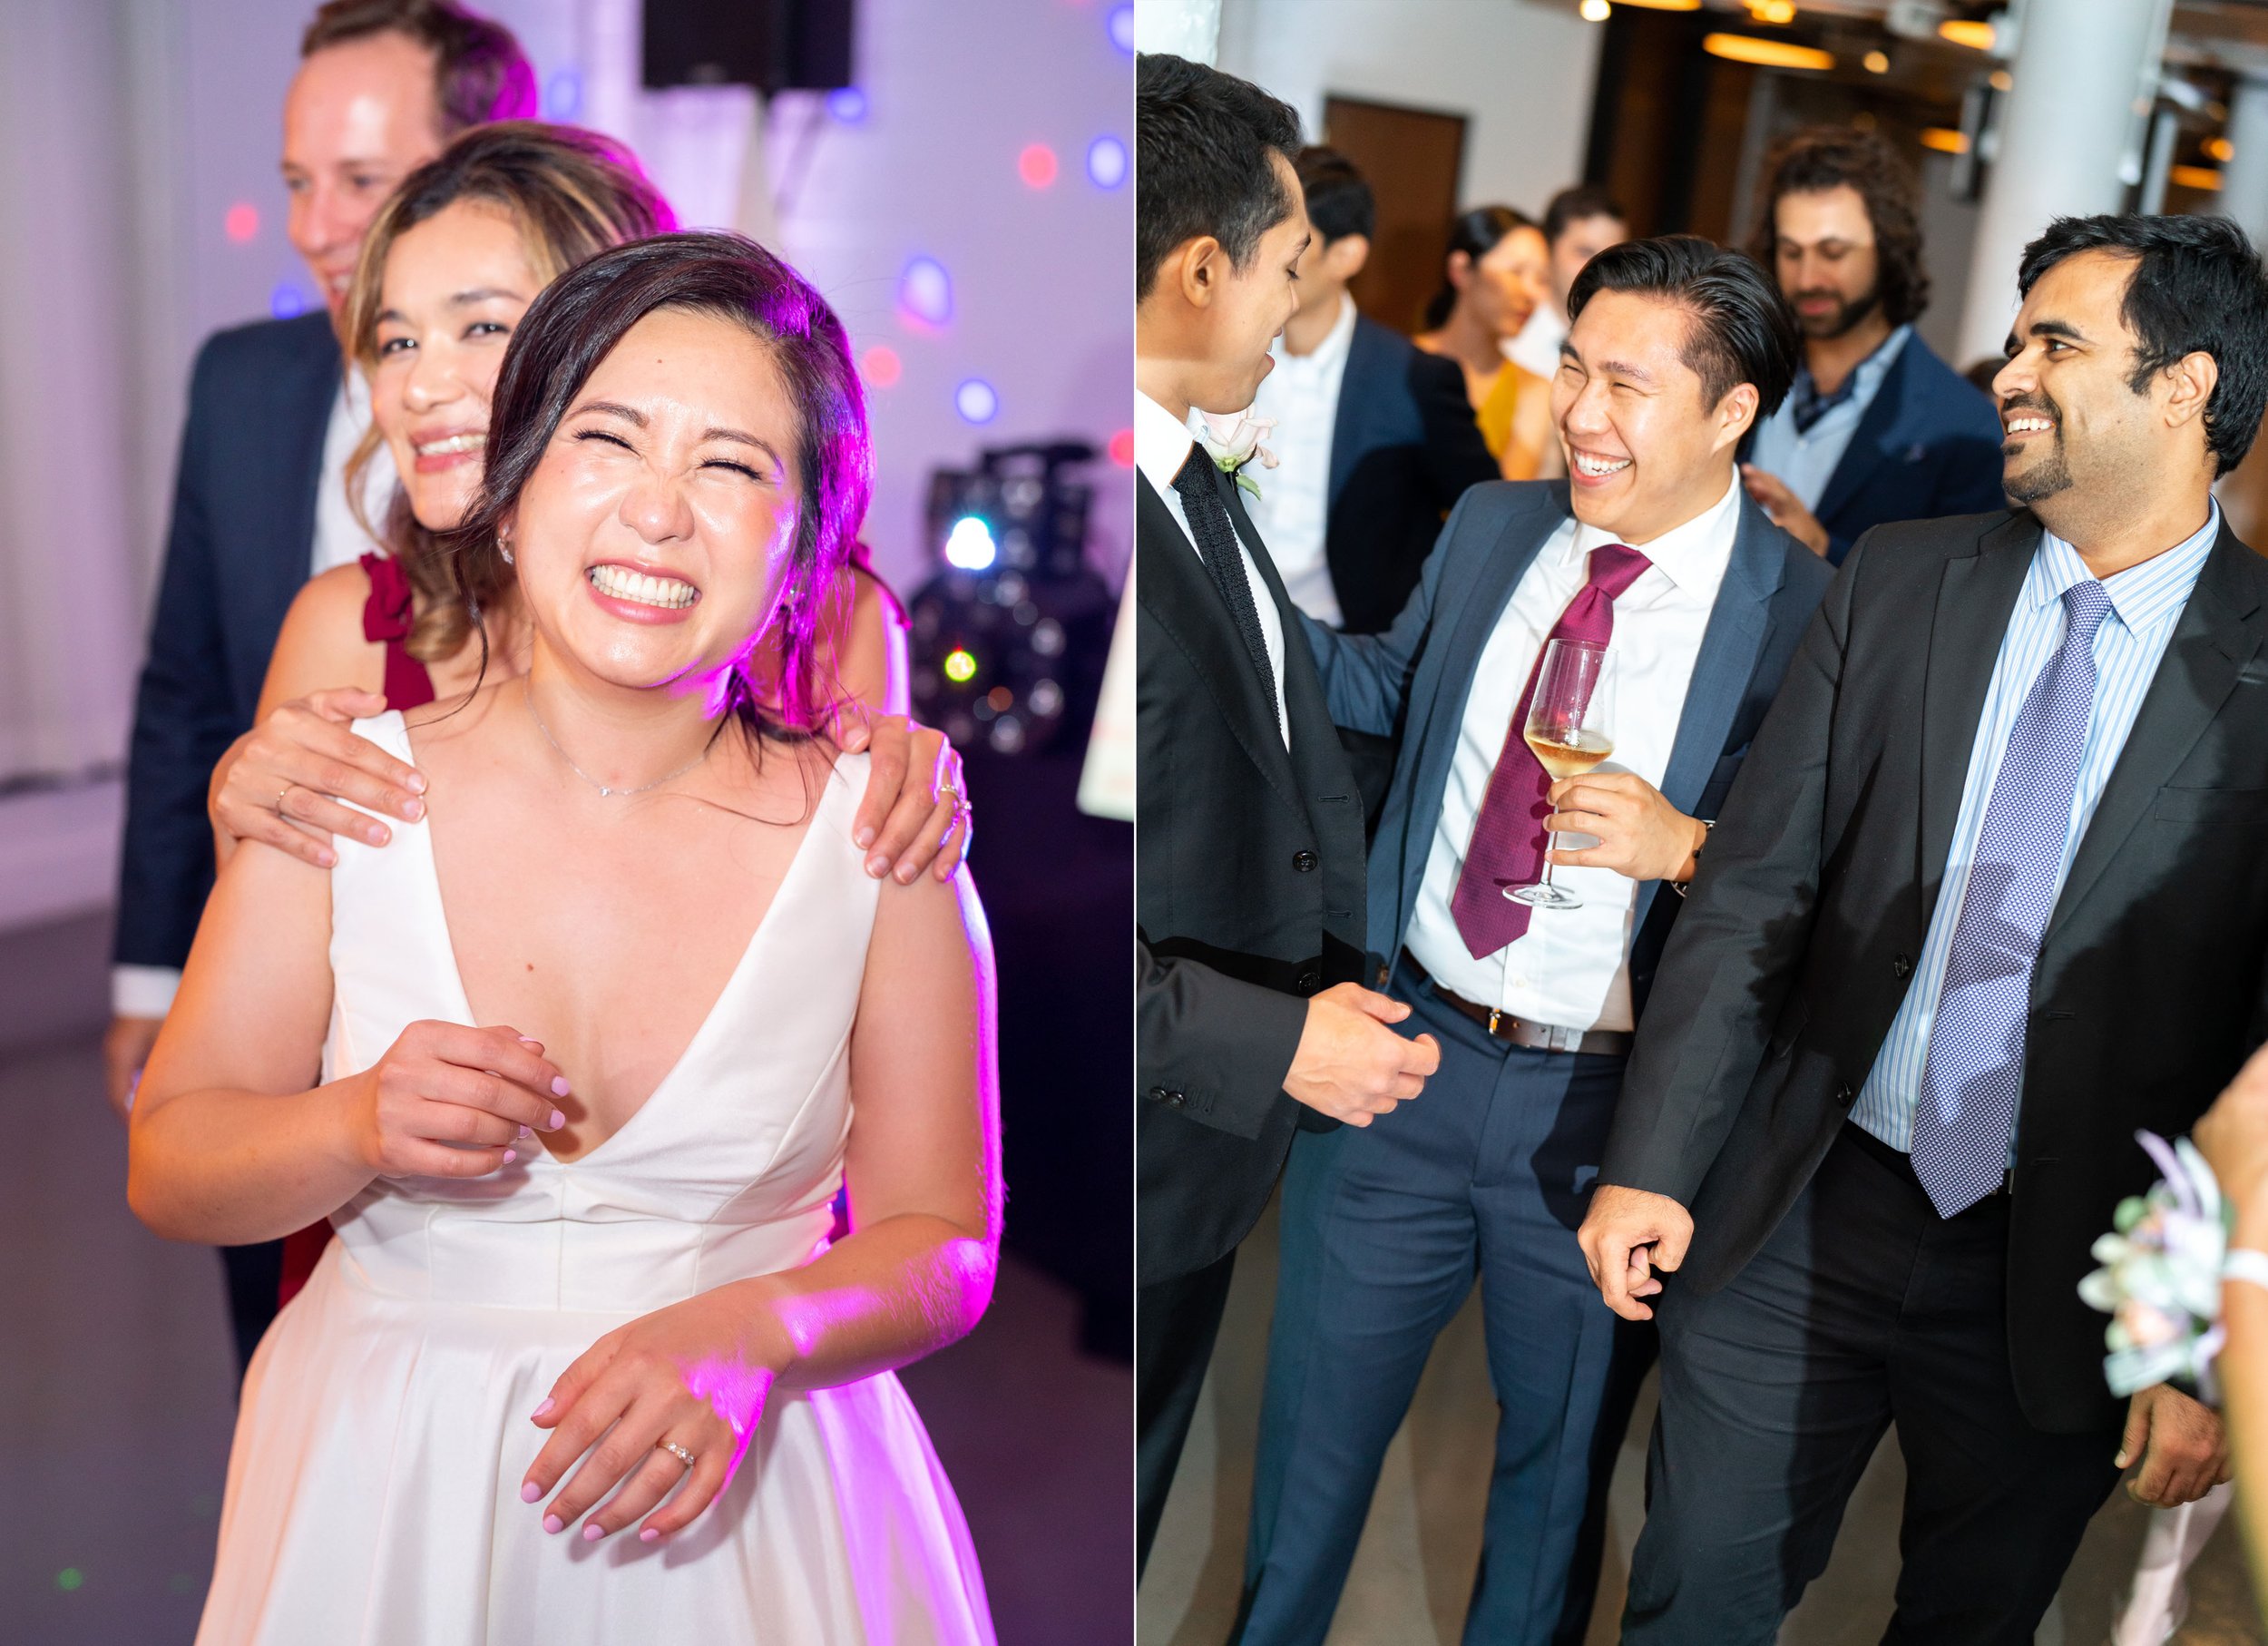 Bride laughing with guests at this fun wedding day photos